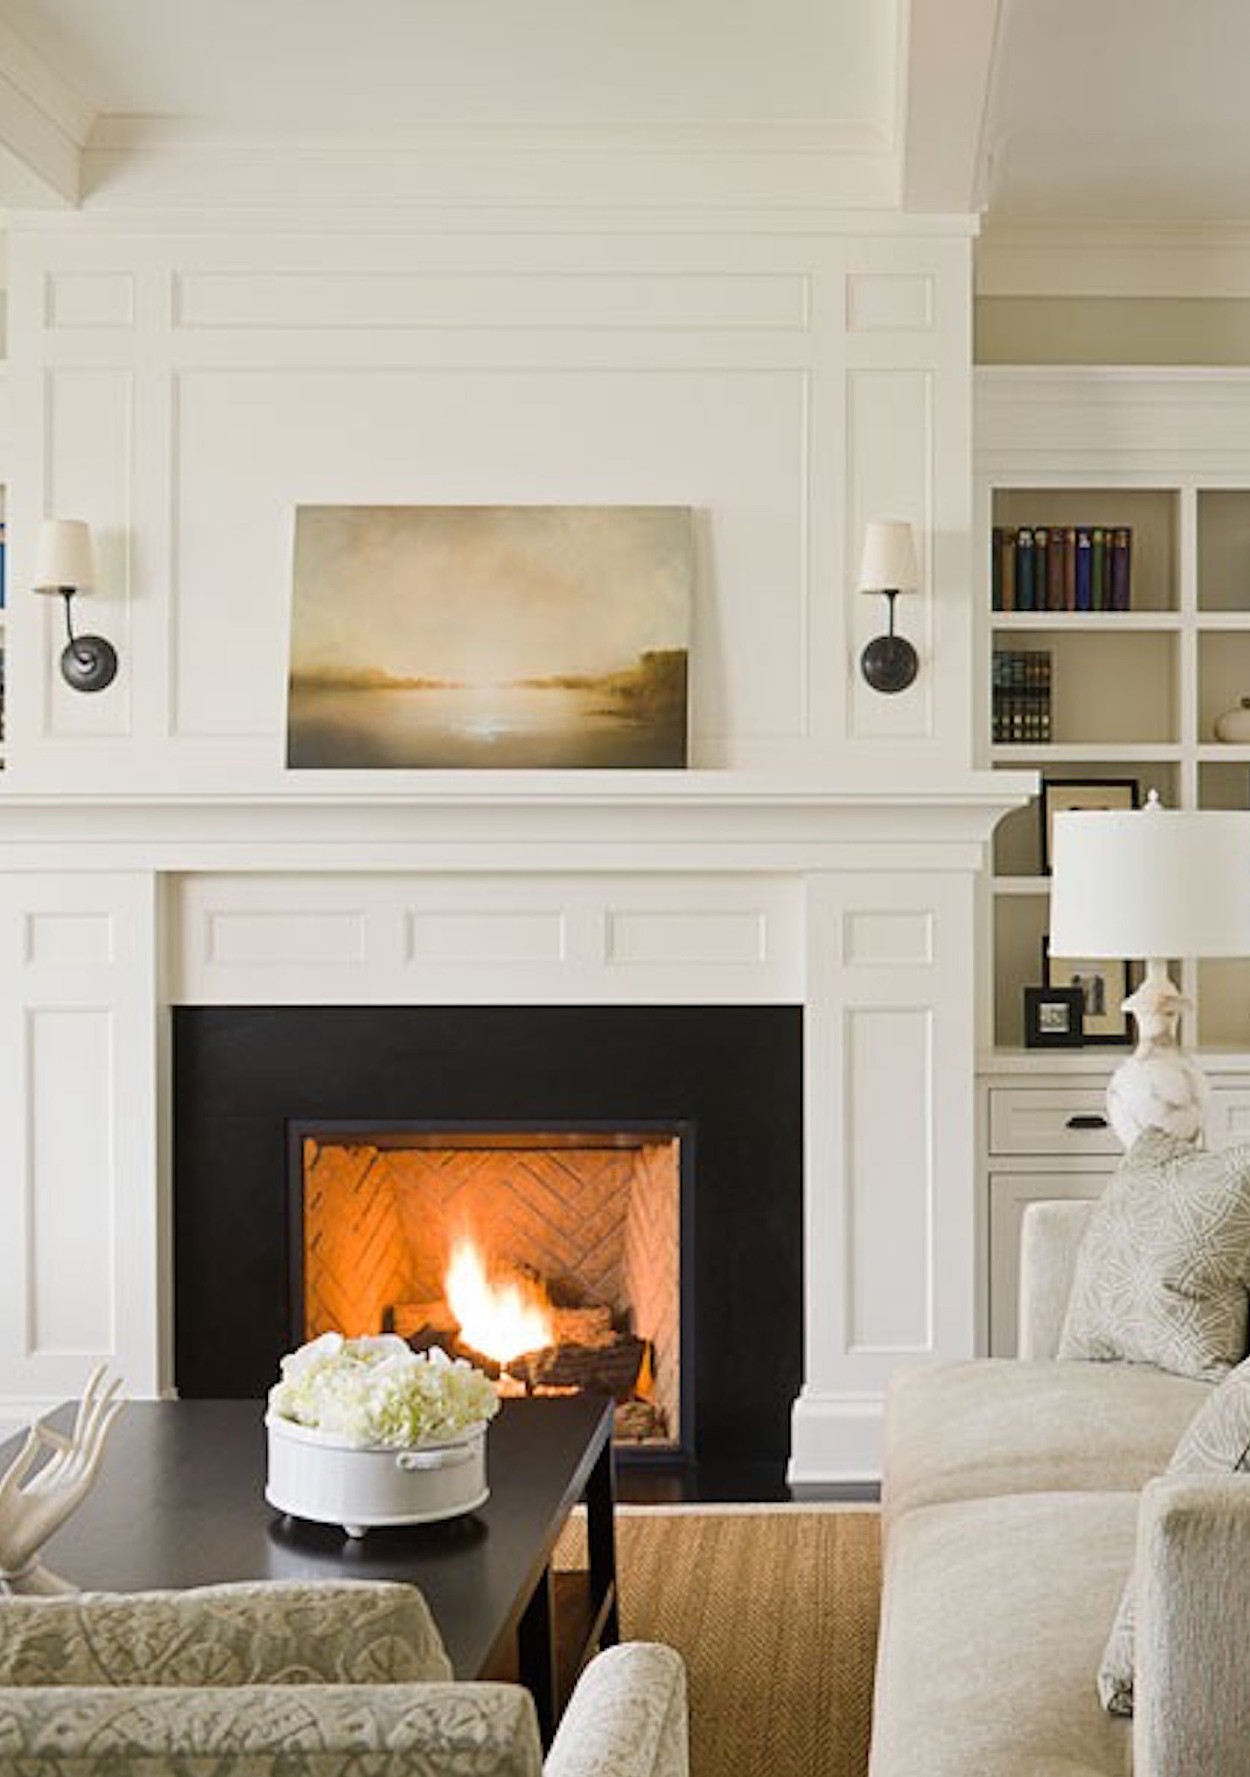 7 Living Room Color Ideas That Warm up Your Space | Martha ...